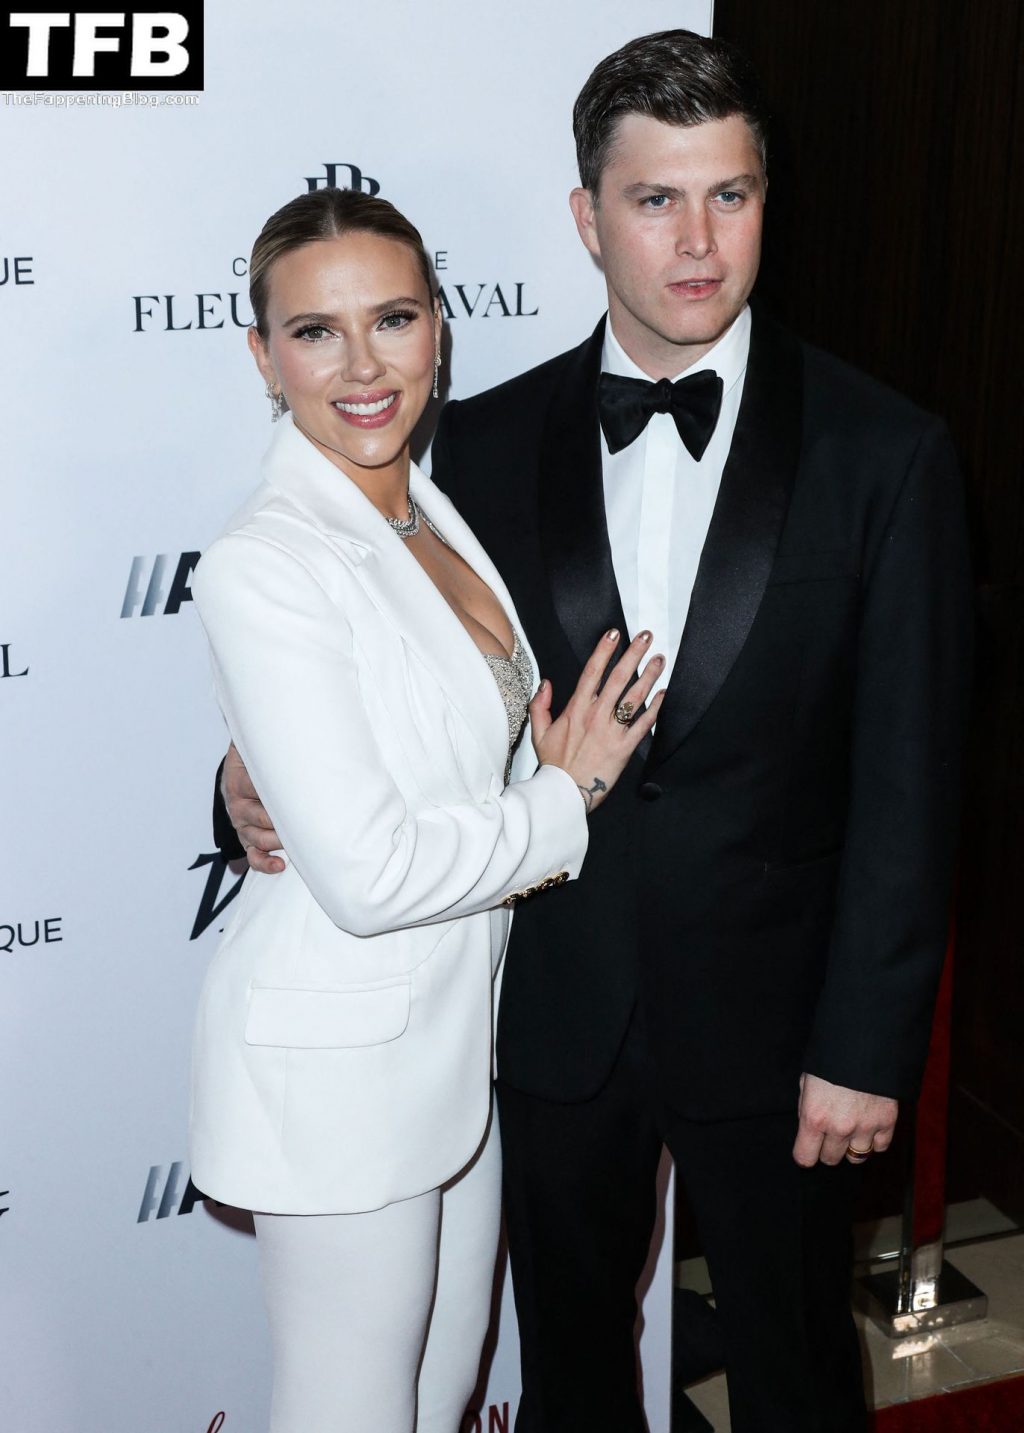 Scarlett Johansson Shows Off Her Sexy Tits at the 35th Annual American Cinematheque Awards (151 Photos)